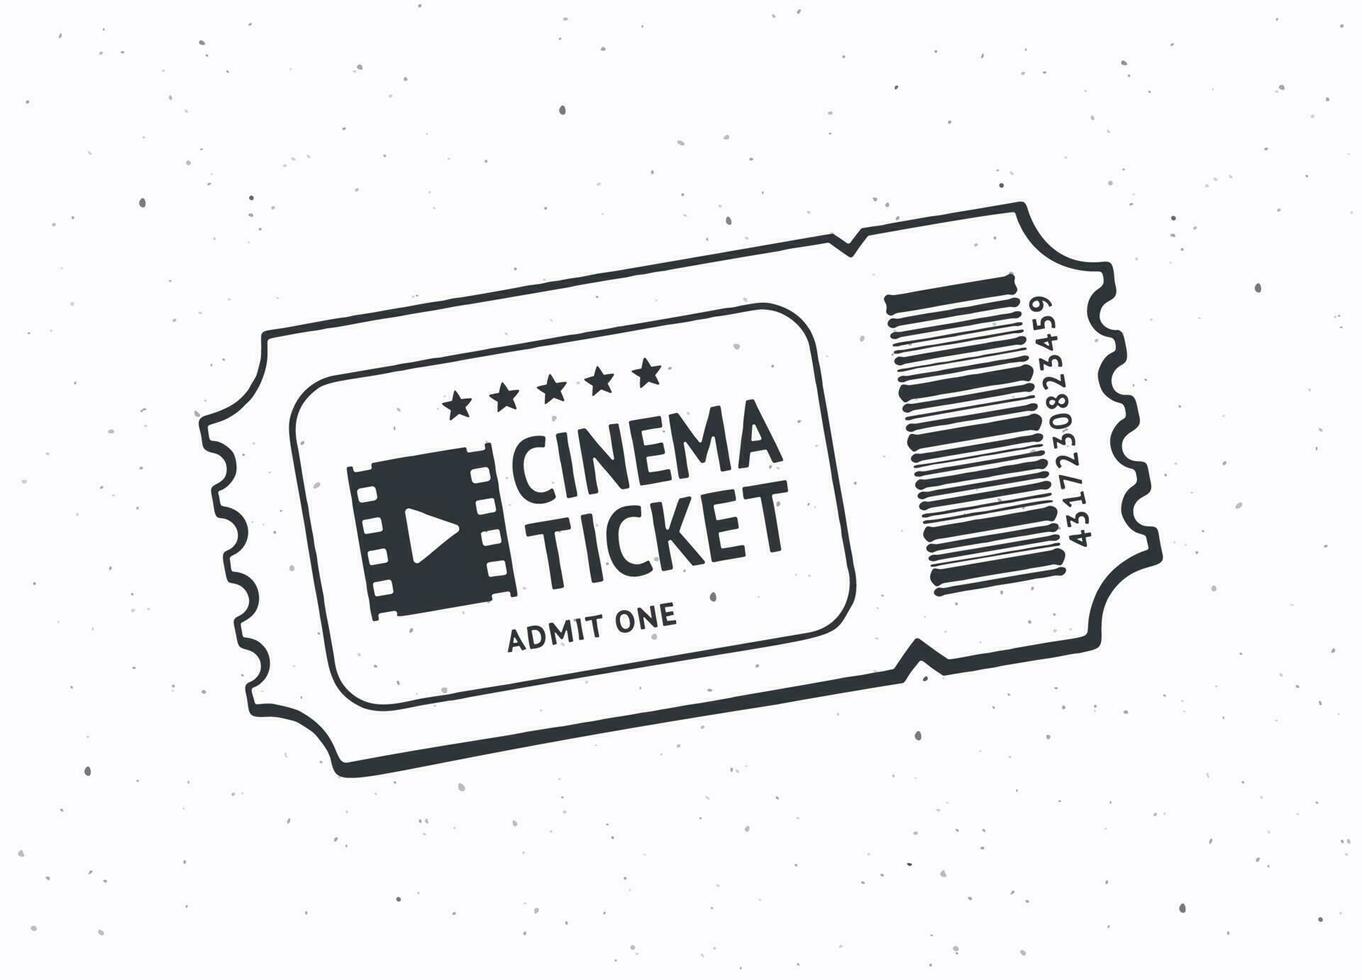 Outline of one cinema ticket. Paper retro coupon for movie entry. Symbol of the film industry. Vector illustration. Hand drawn black ink sketch, isolated on white background